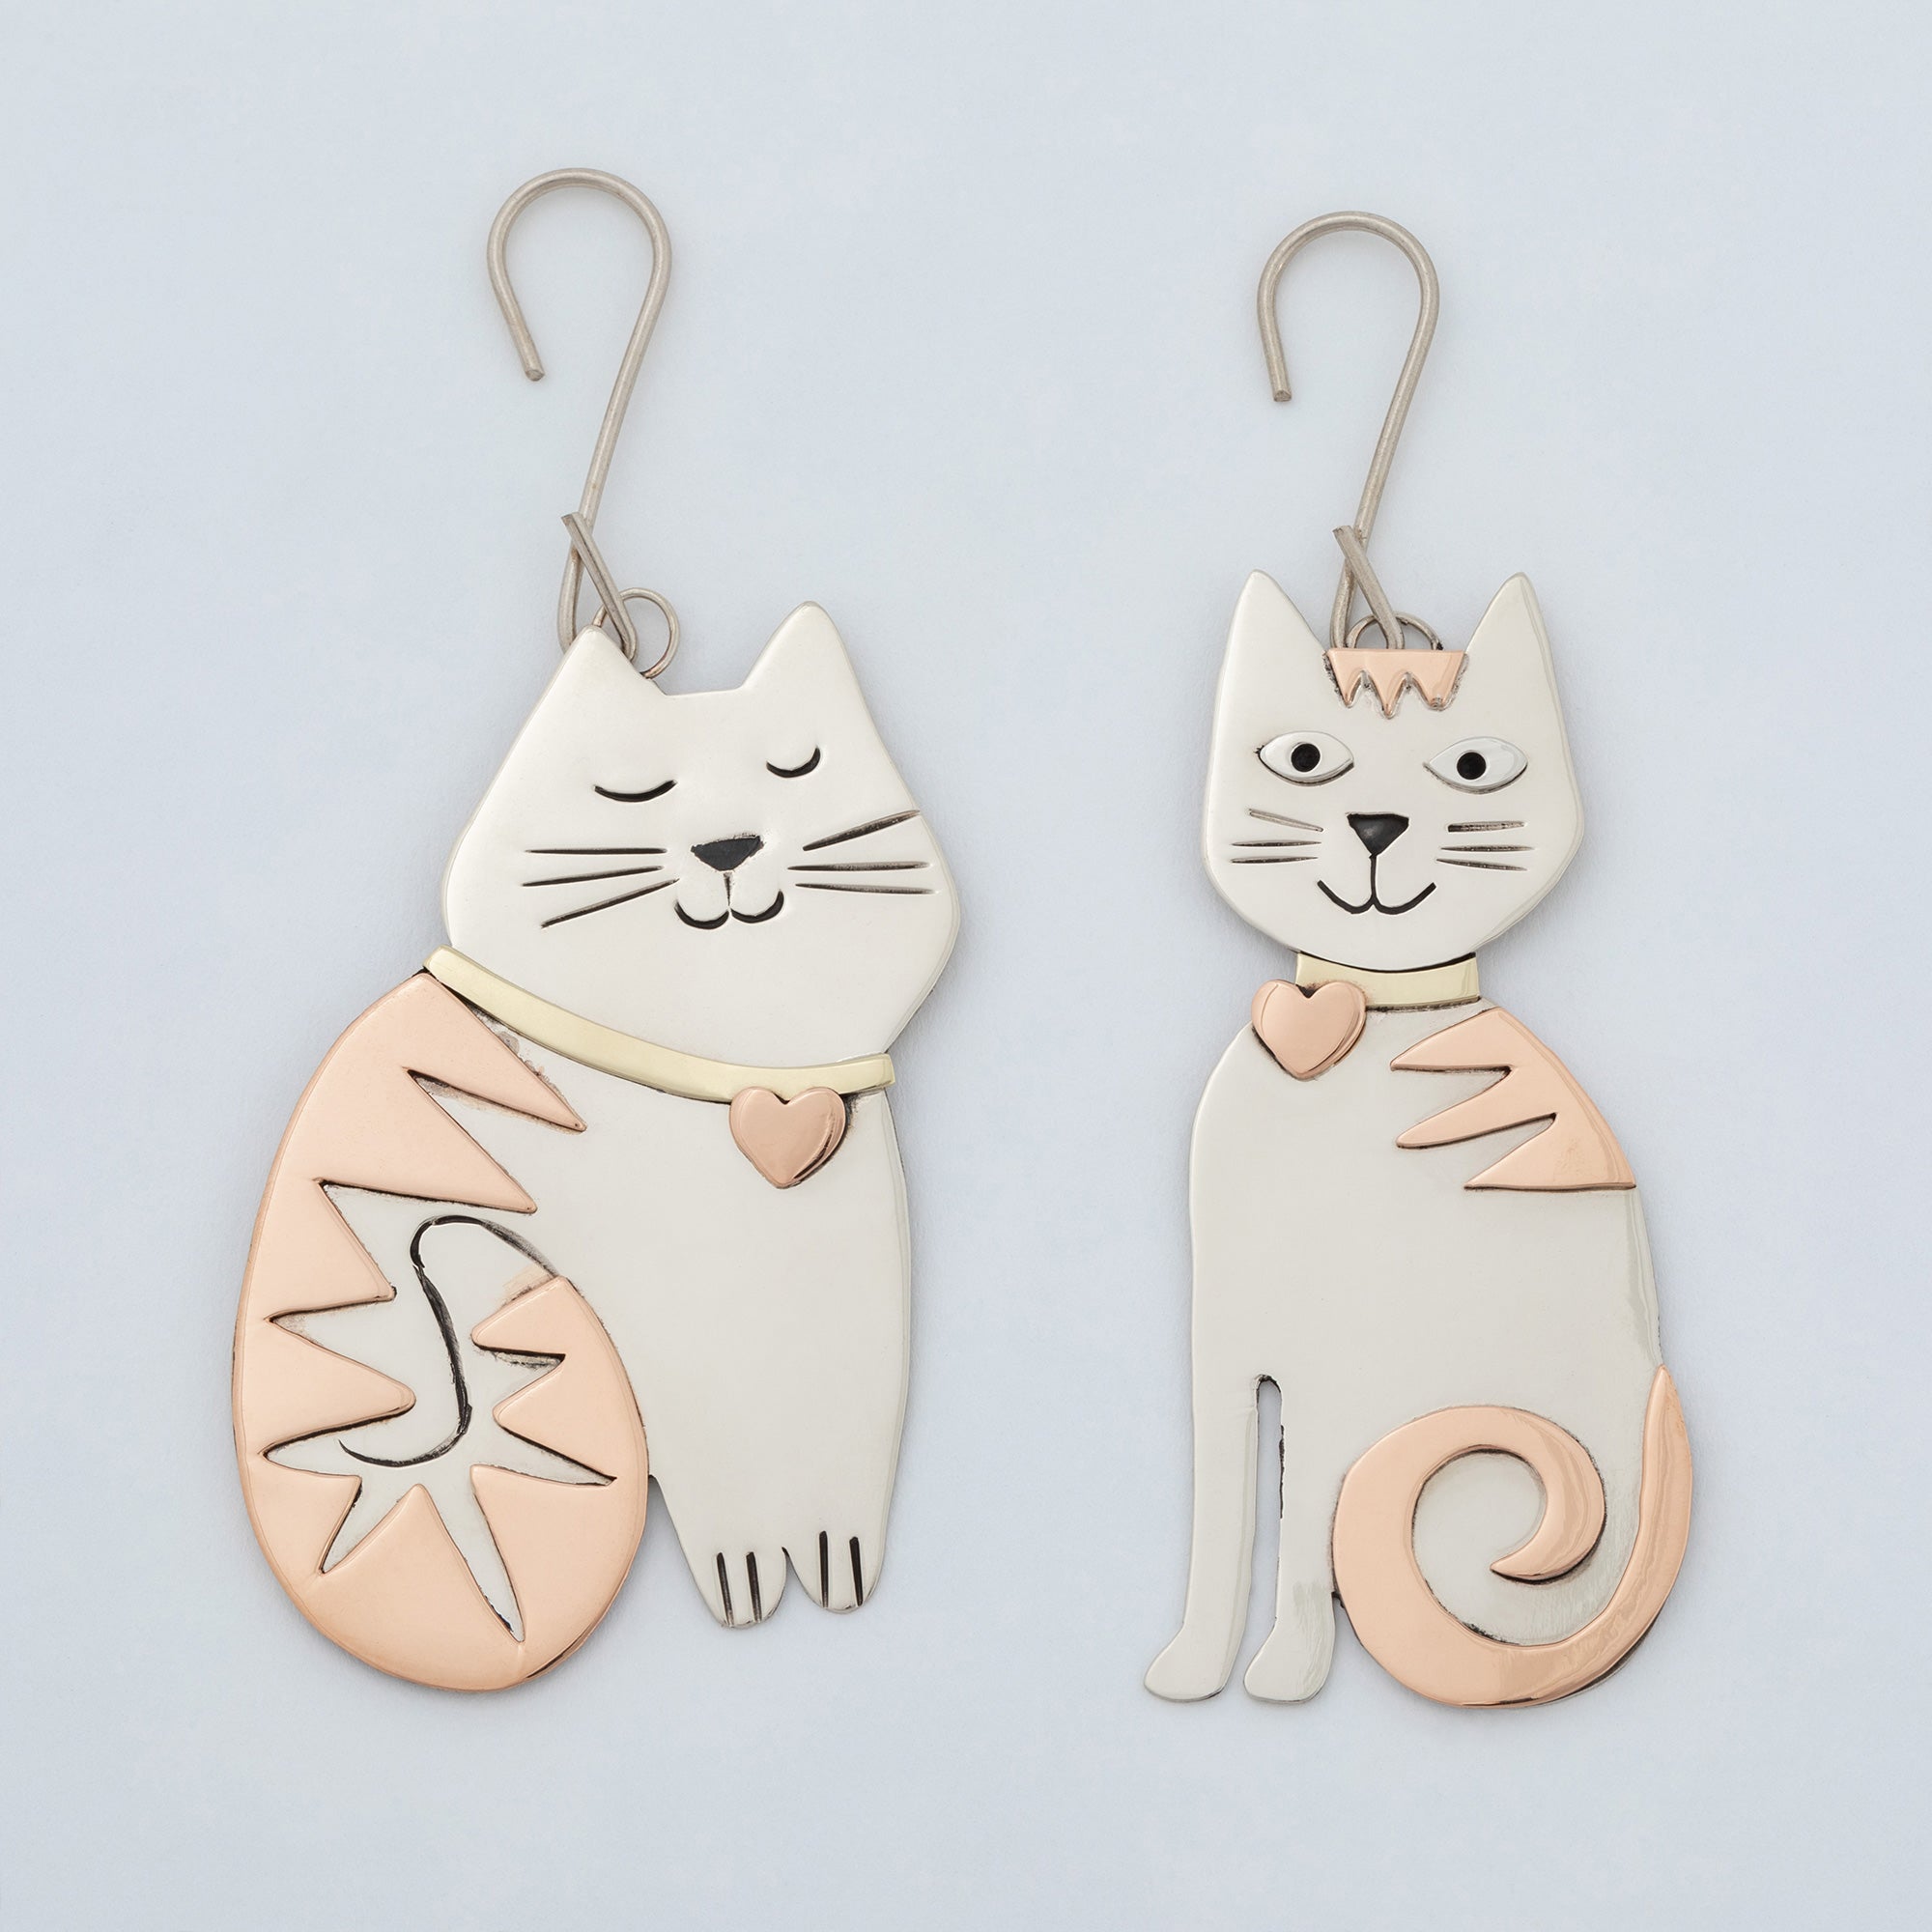 Whiskers & Stripes Cat Ornament - Sitting